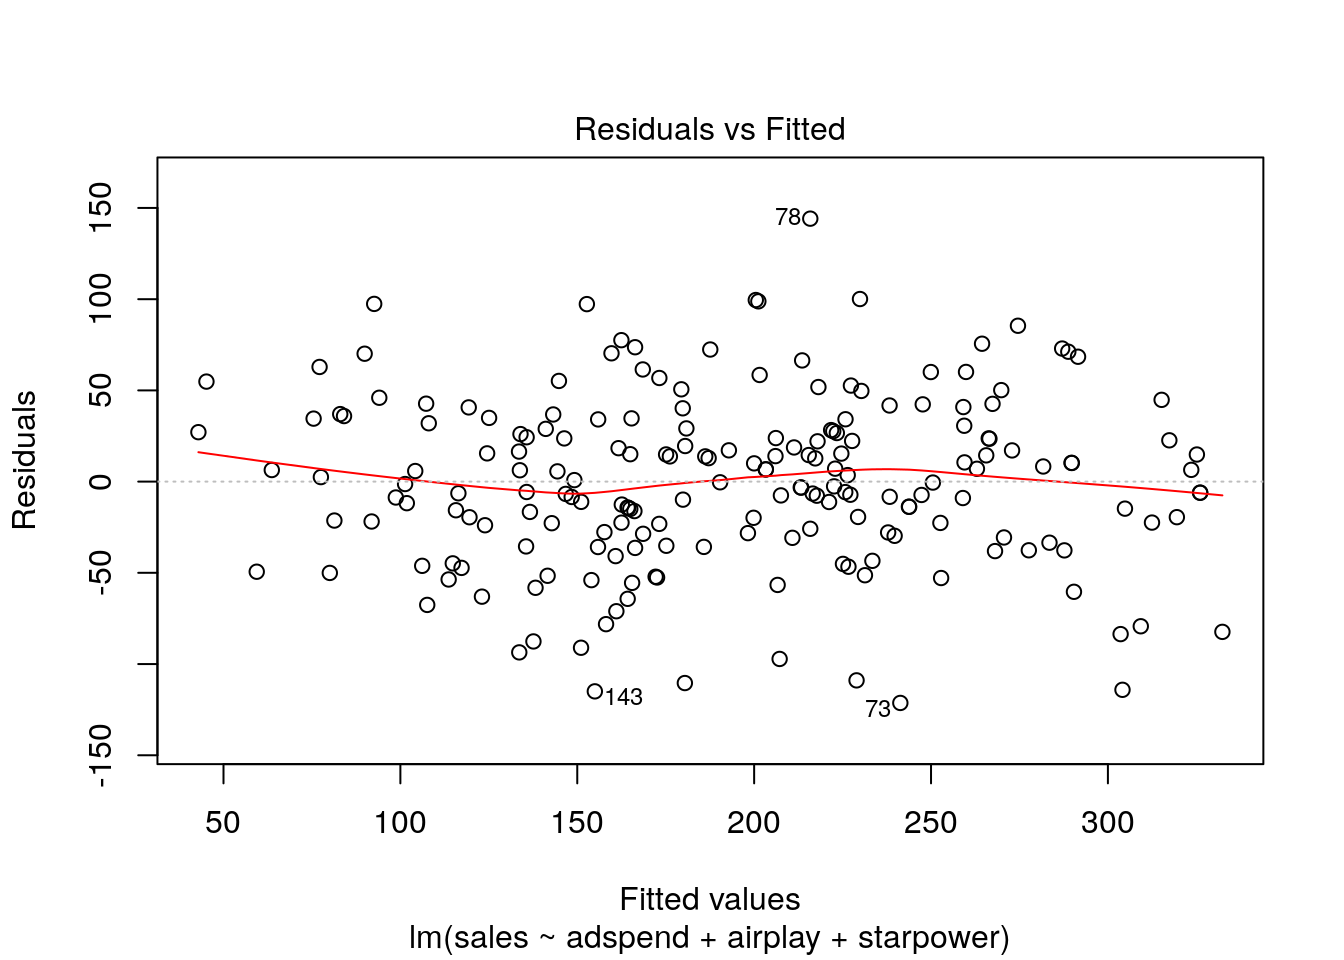 Residuals vs. fitted values